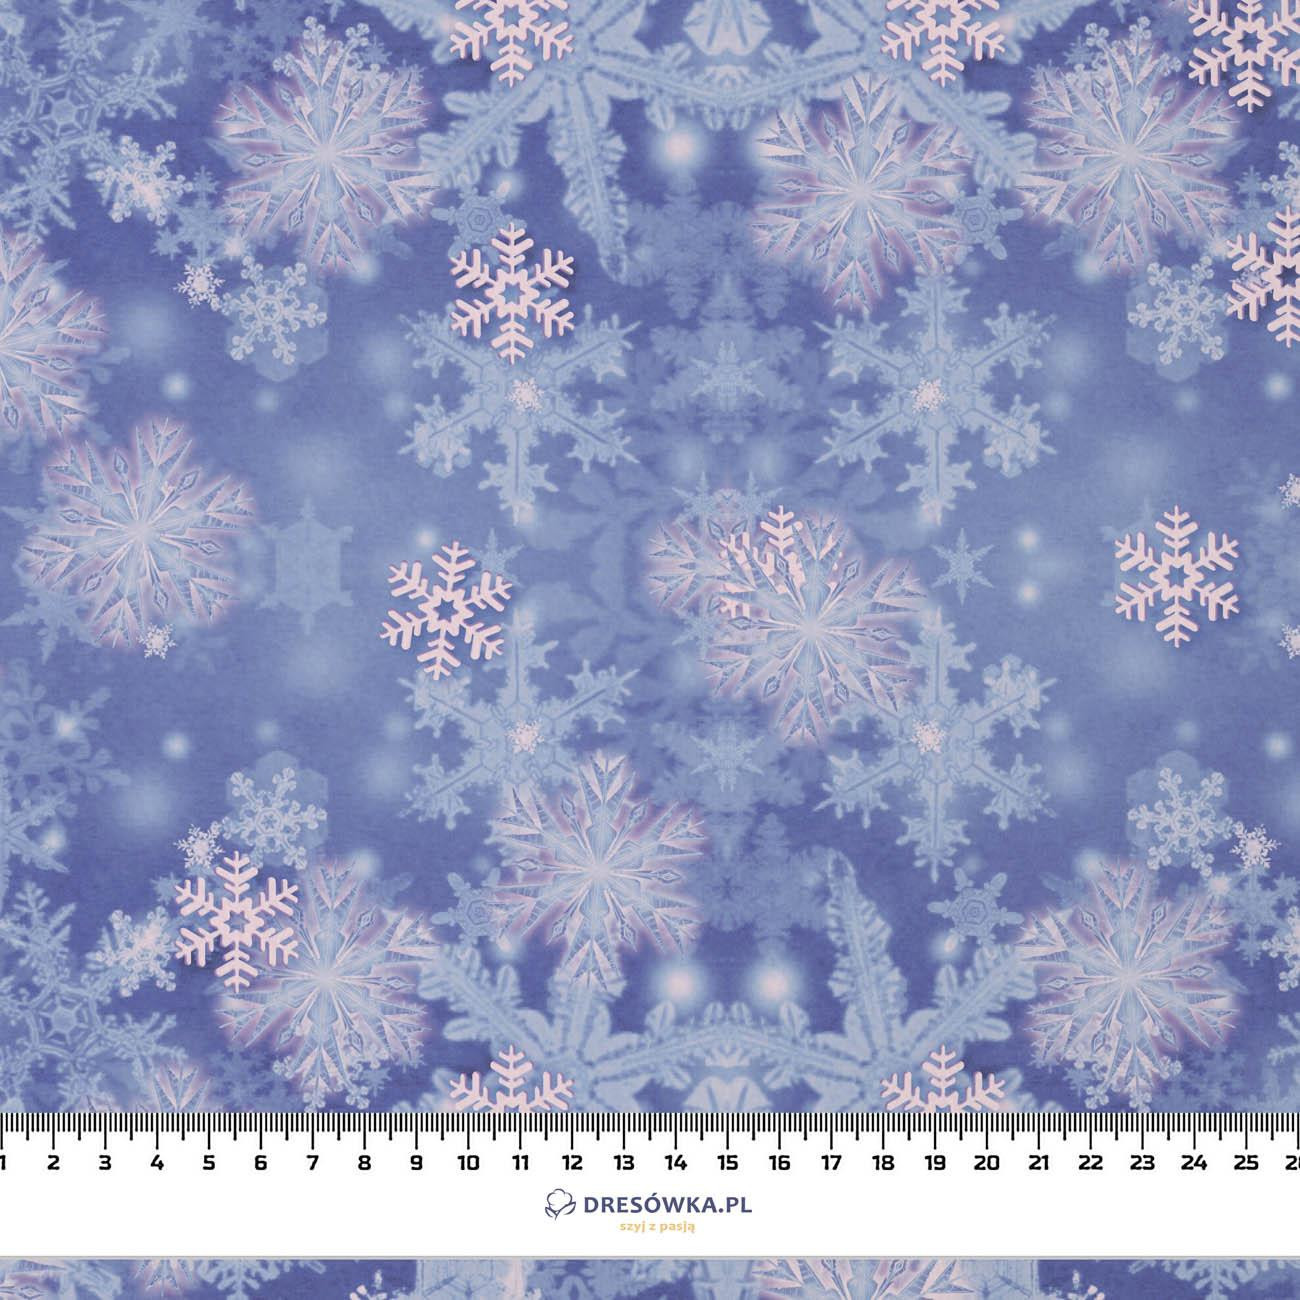 SNOWFLAKES (Very Peri) - looped knit fabric